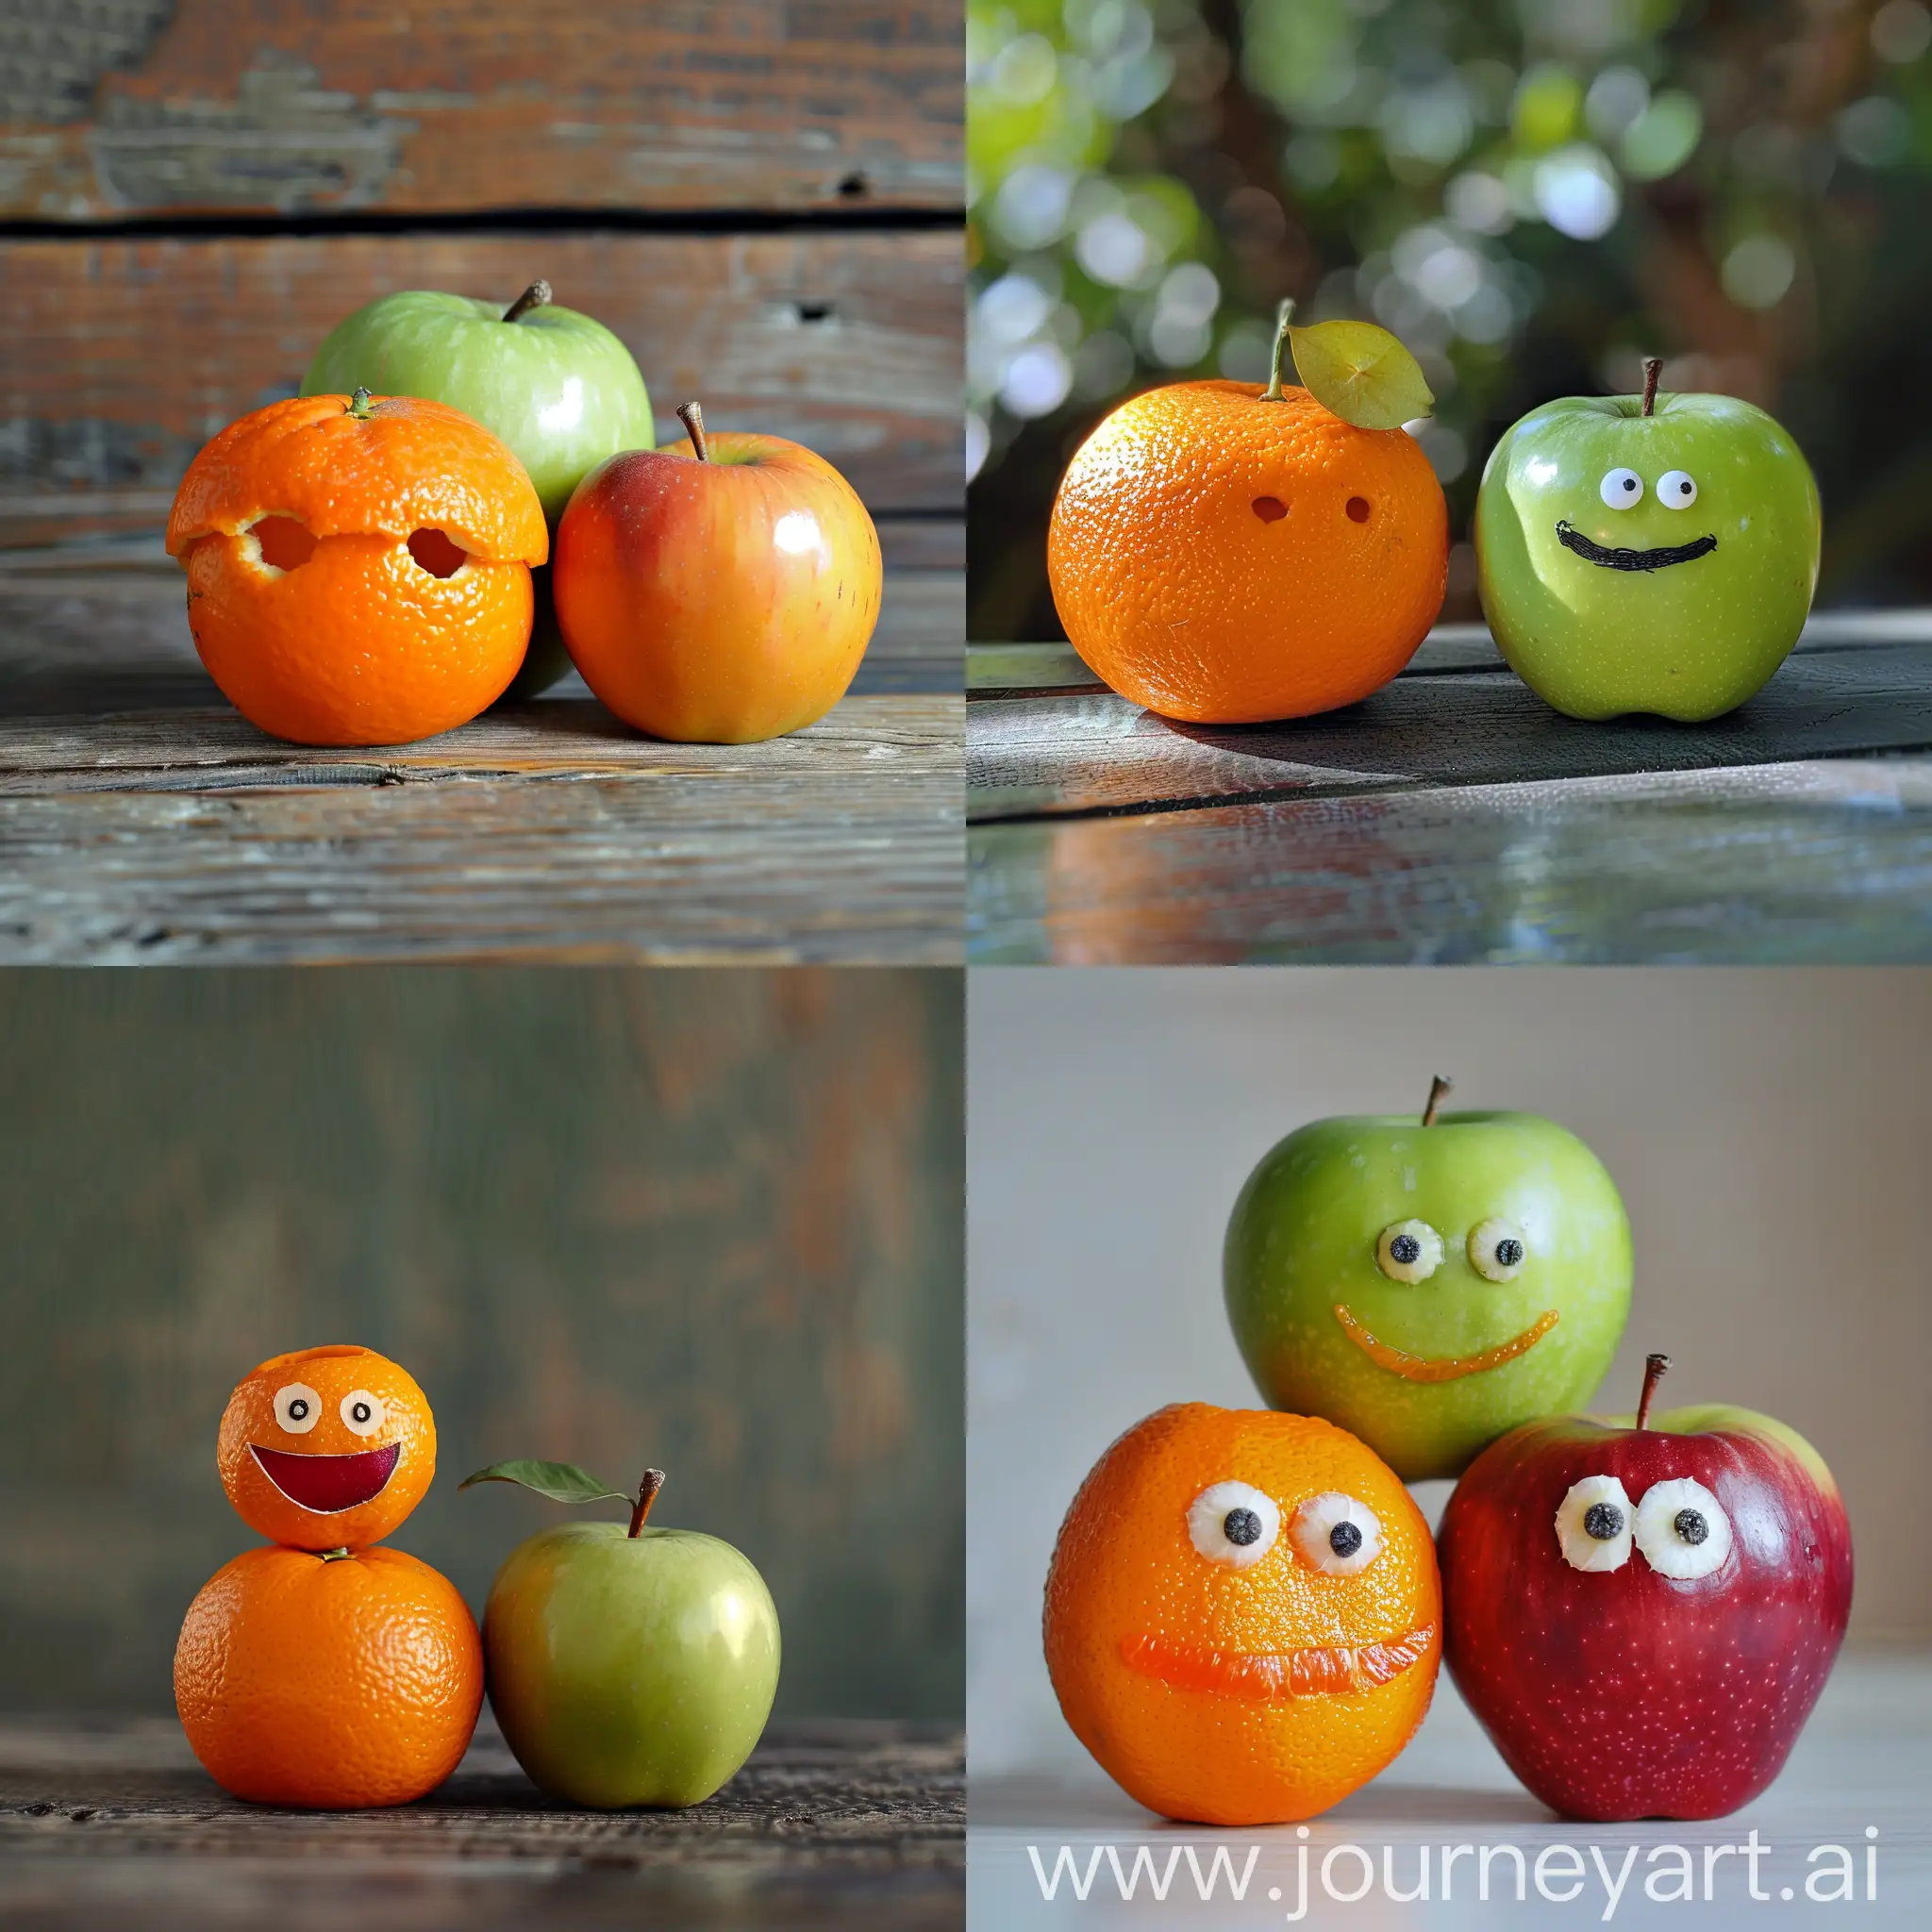 orange fruit as dad and apple as mom